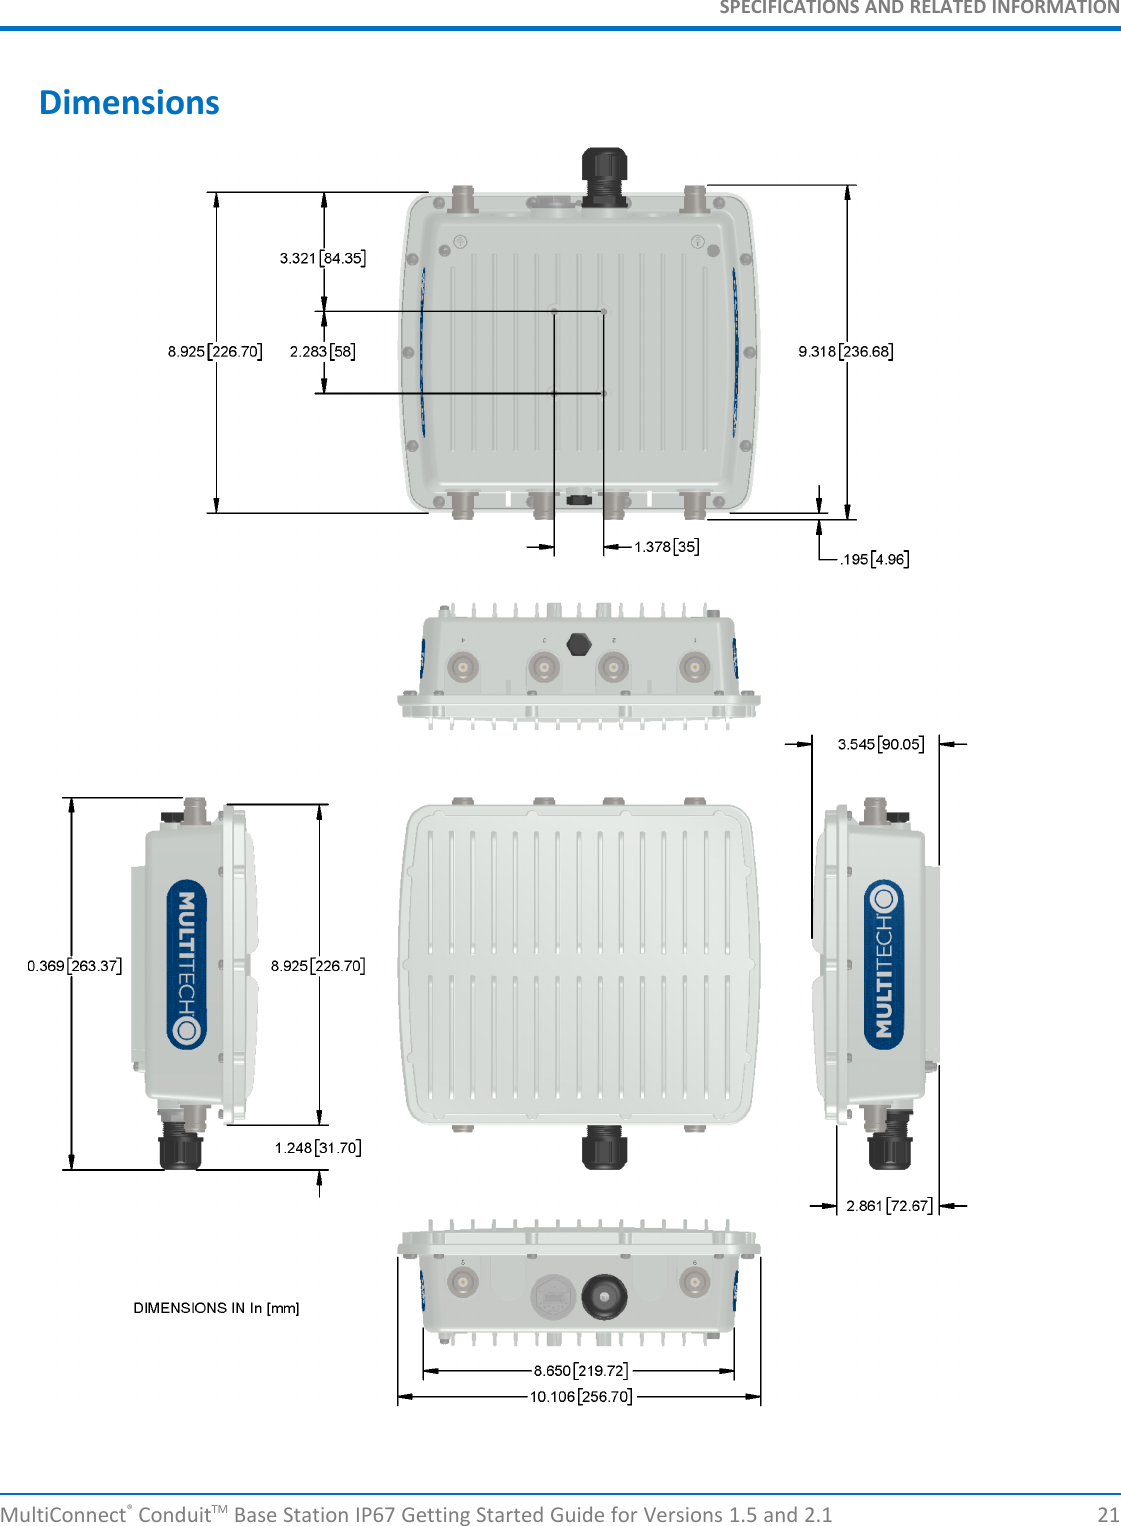 SPECIFICATIONS AND RELATED INFORMATIONMultiConnect®ConduitTM Base Station IP67 Getting Started Guide for Versions 1.5 and 2.1 21Dimensions